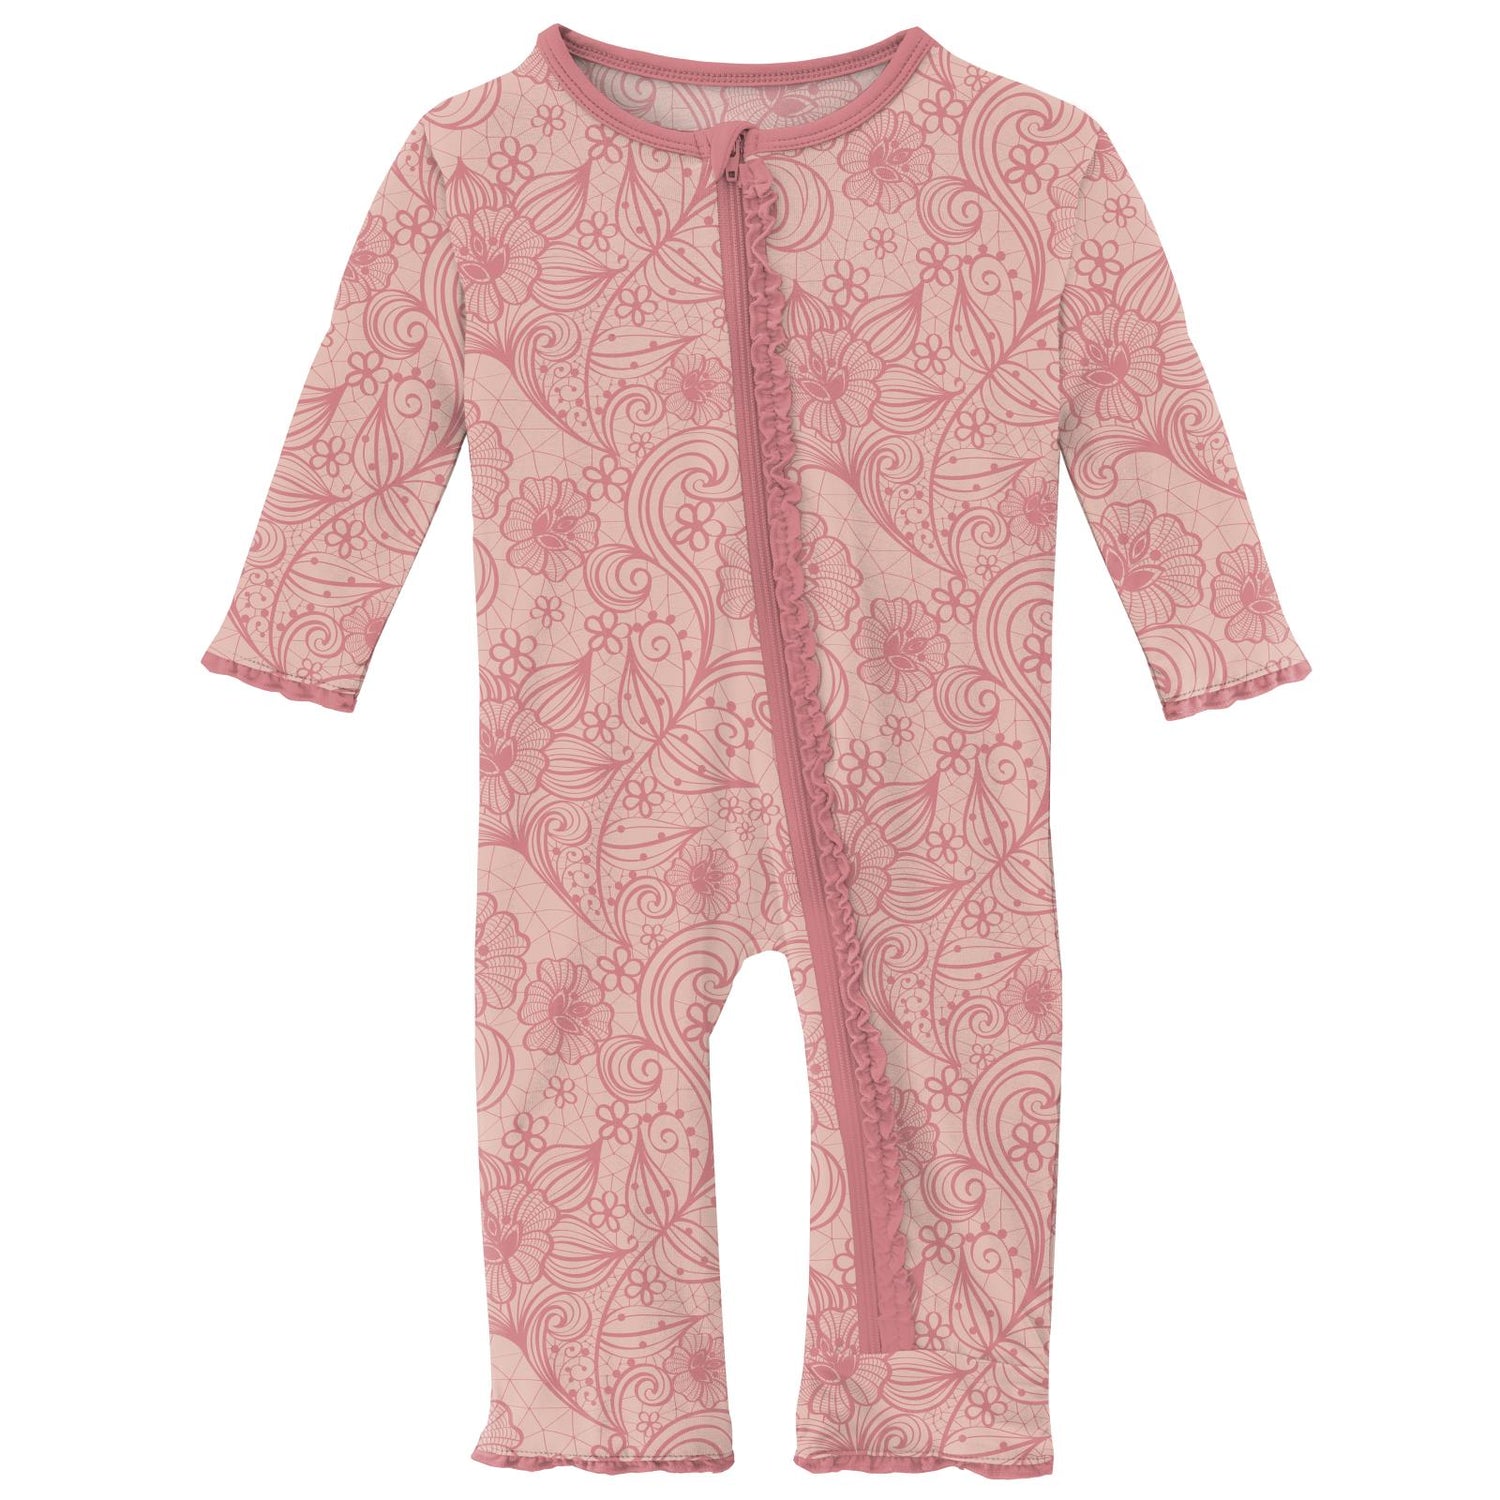 Print Muffin Ruffle Coverall with Zipper in Peach Blossom Lace